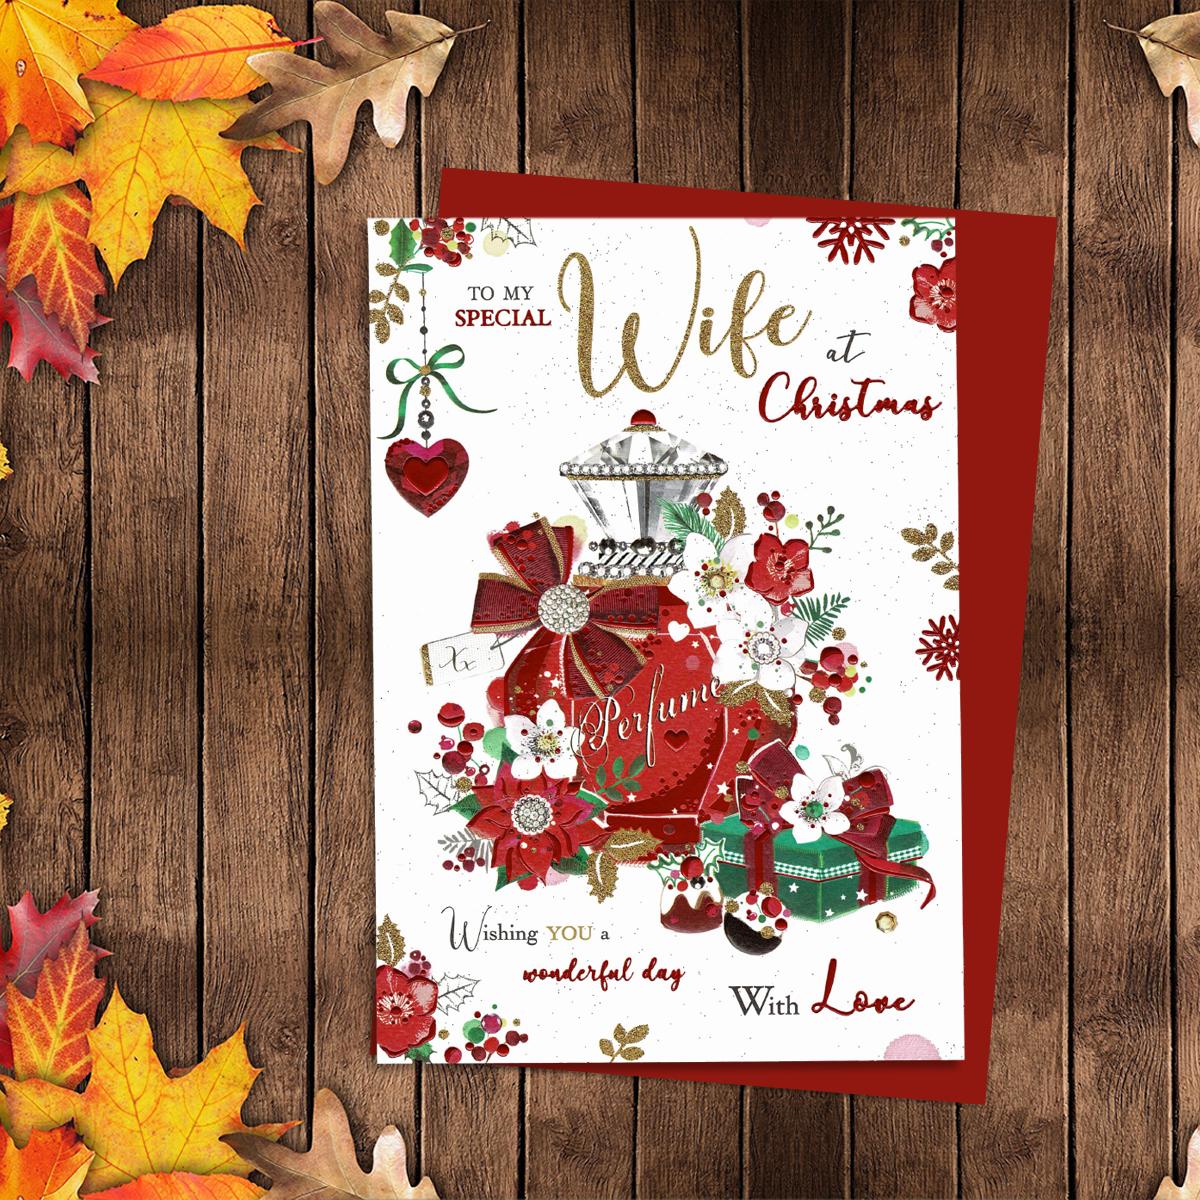 To My Special wife At Christmas Showing A Beautiful decorated perfume Bottle With Wrapped Gifts And Poinsettias. Finished With Gold Glitter Lettering, Red Foil Details And Red Envelope